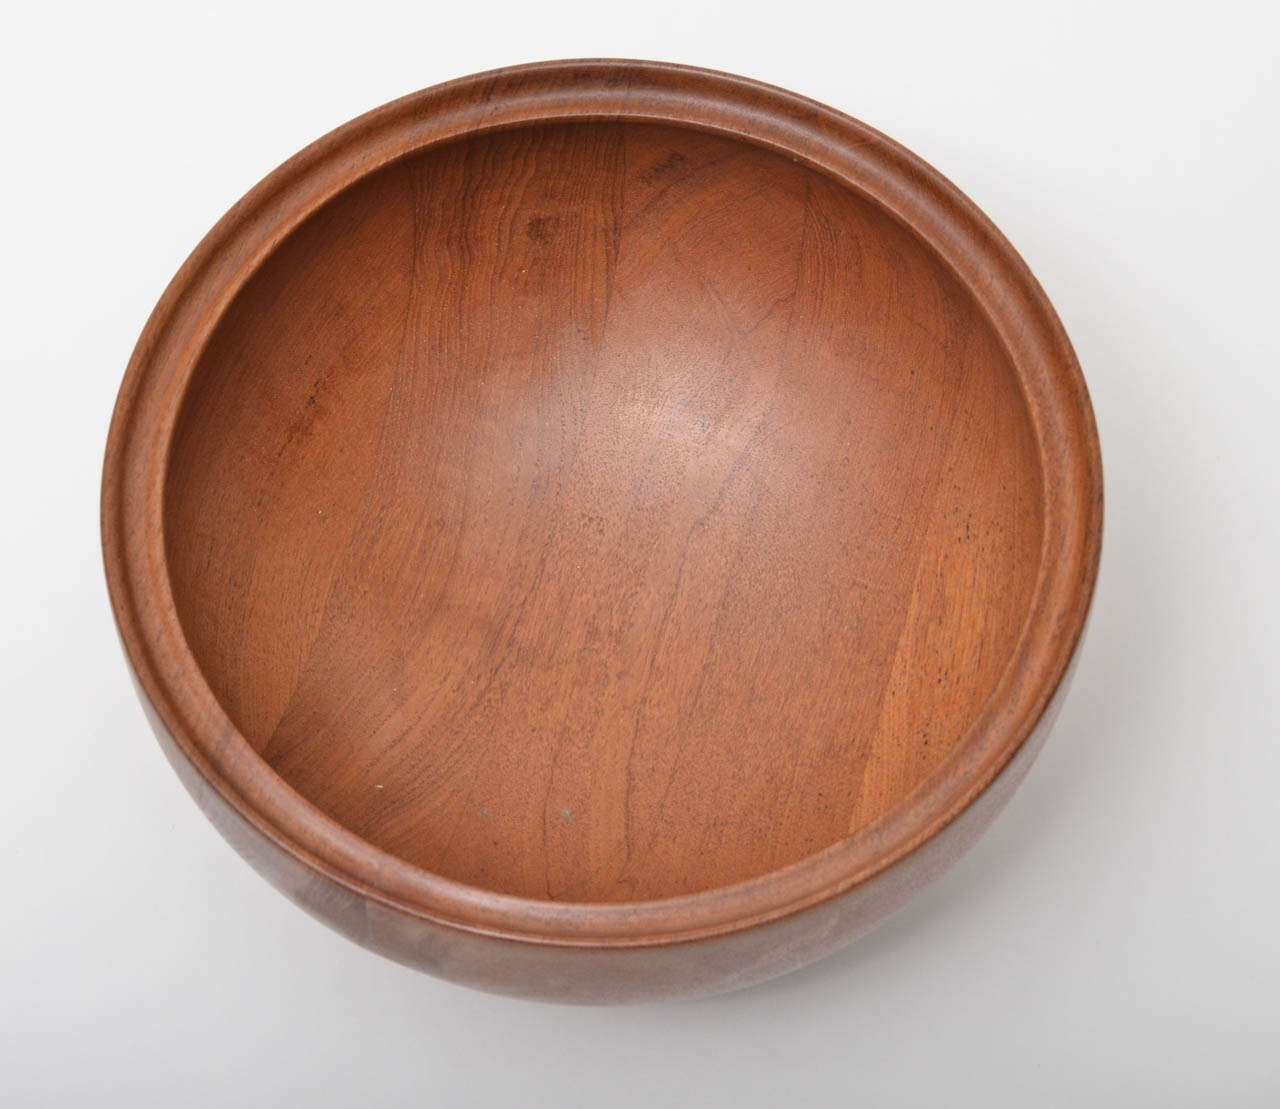 Hemispherical Bowl made of Teak.  Double Rim reinforces the nice heft of the wood.  Facsimile stamp signature:  Henning Koppel.  Made in Denmark